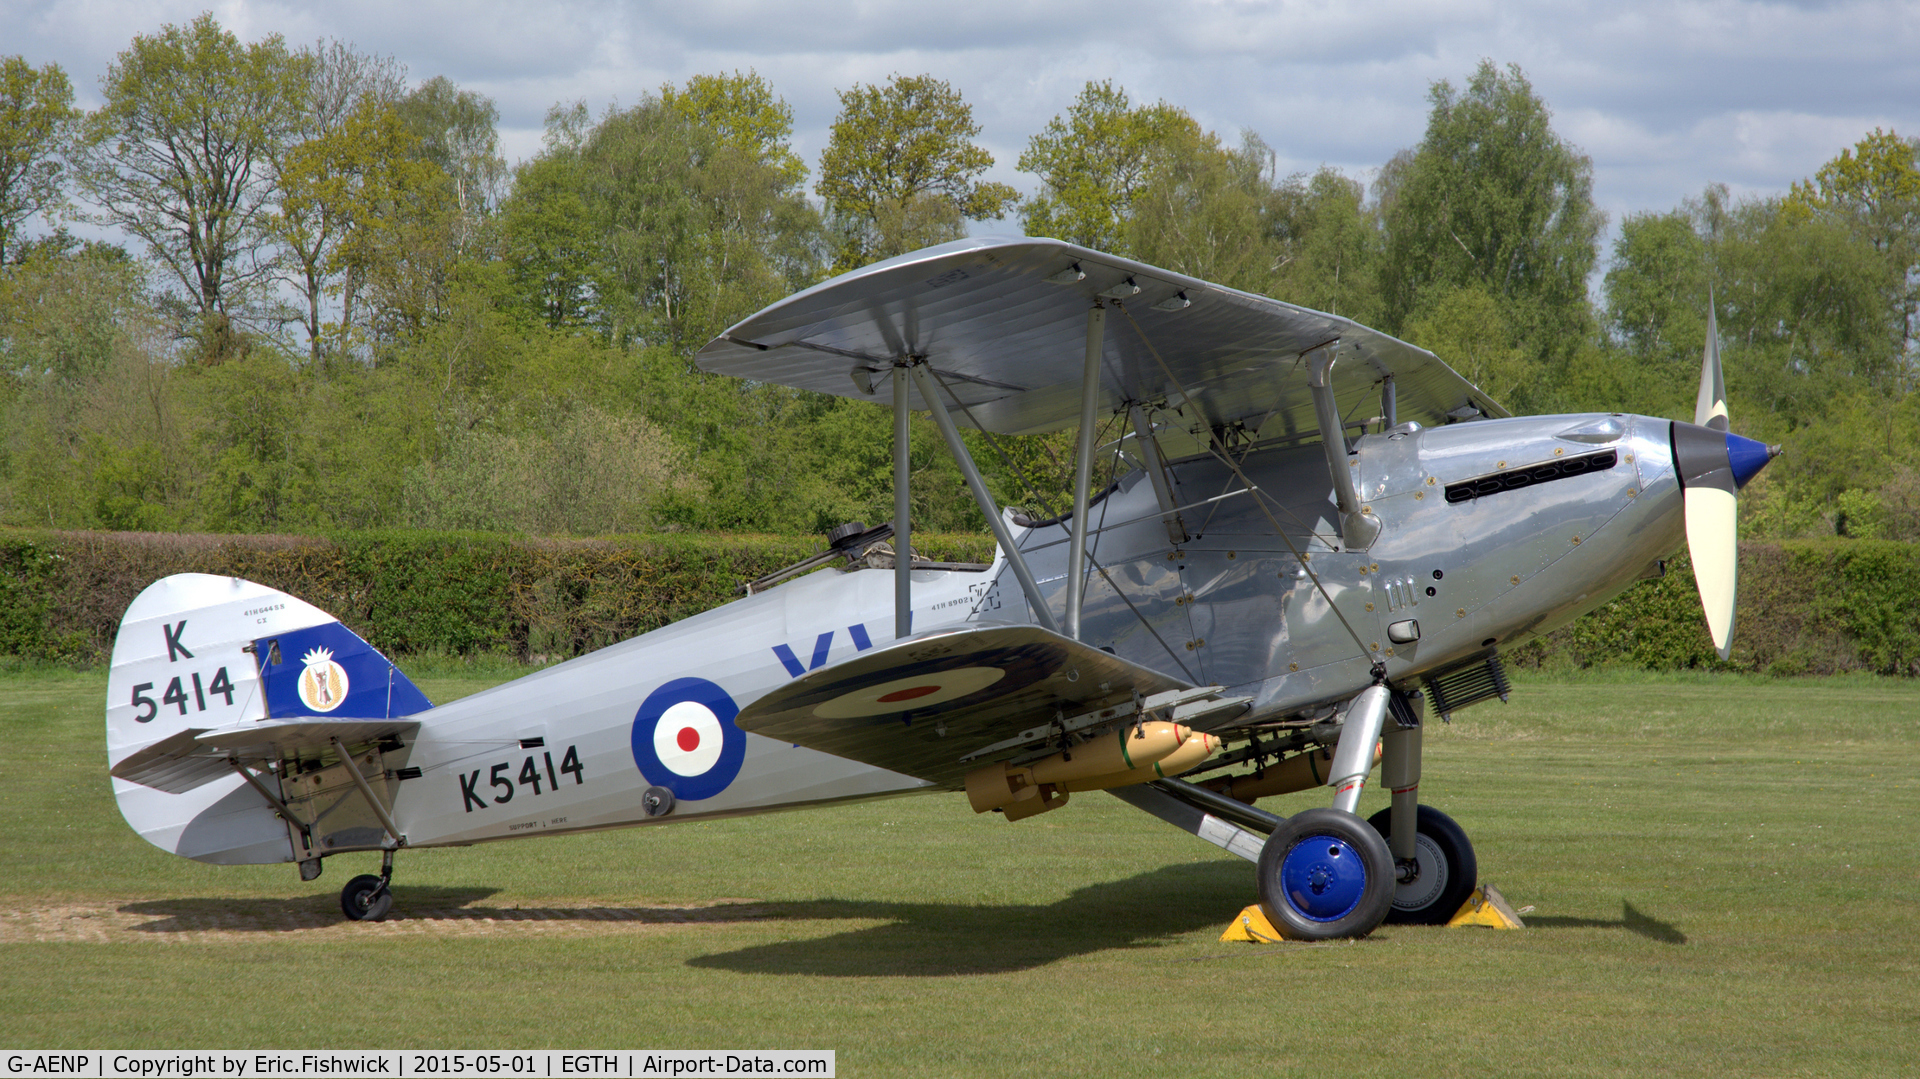 G-AENP, 1935 Hawker Hind C/N 41H/81902, 2. K5414's pre-Season check-over. 1st May 2015